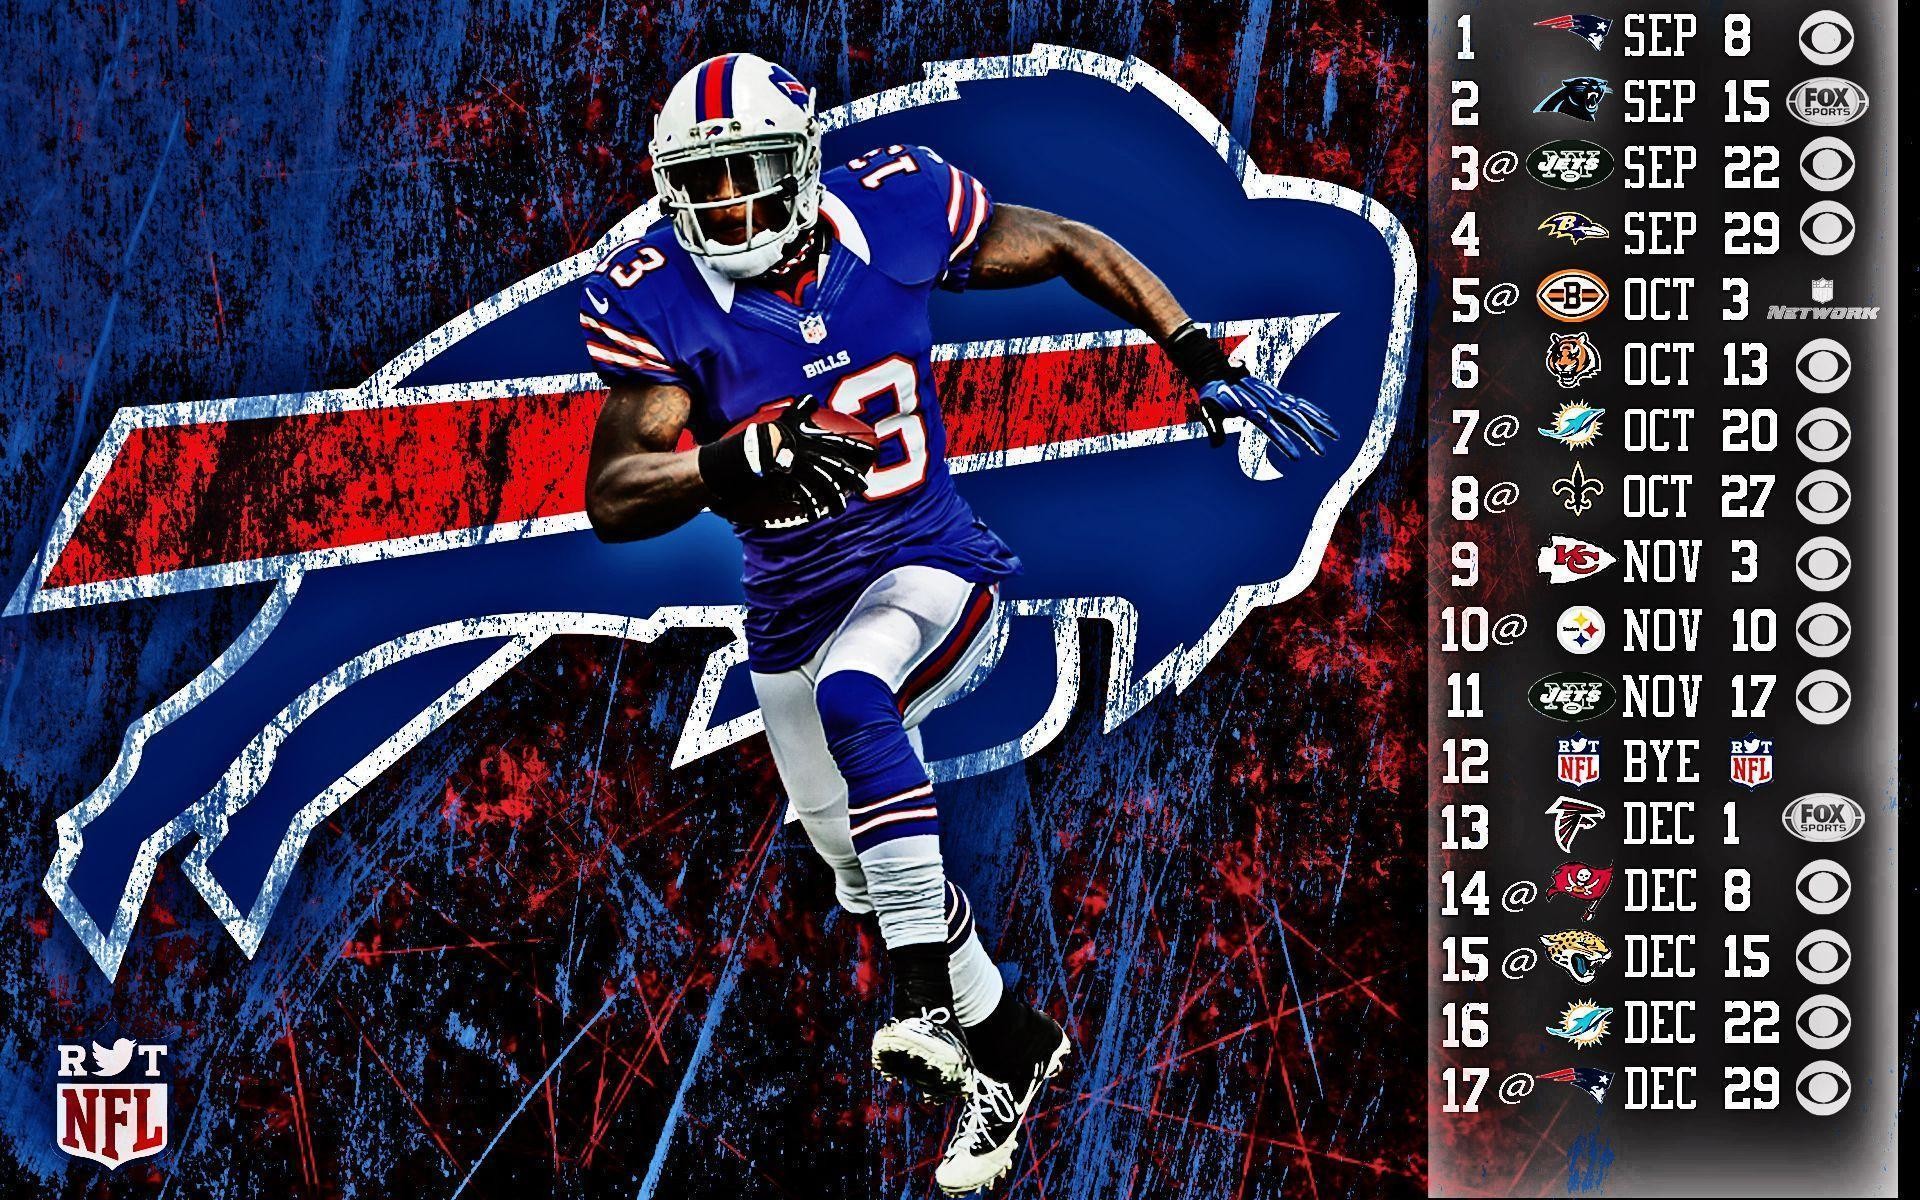 The NFL just posted this sweet Bills wallpaper on their Twitter   rbuffalobills